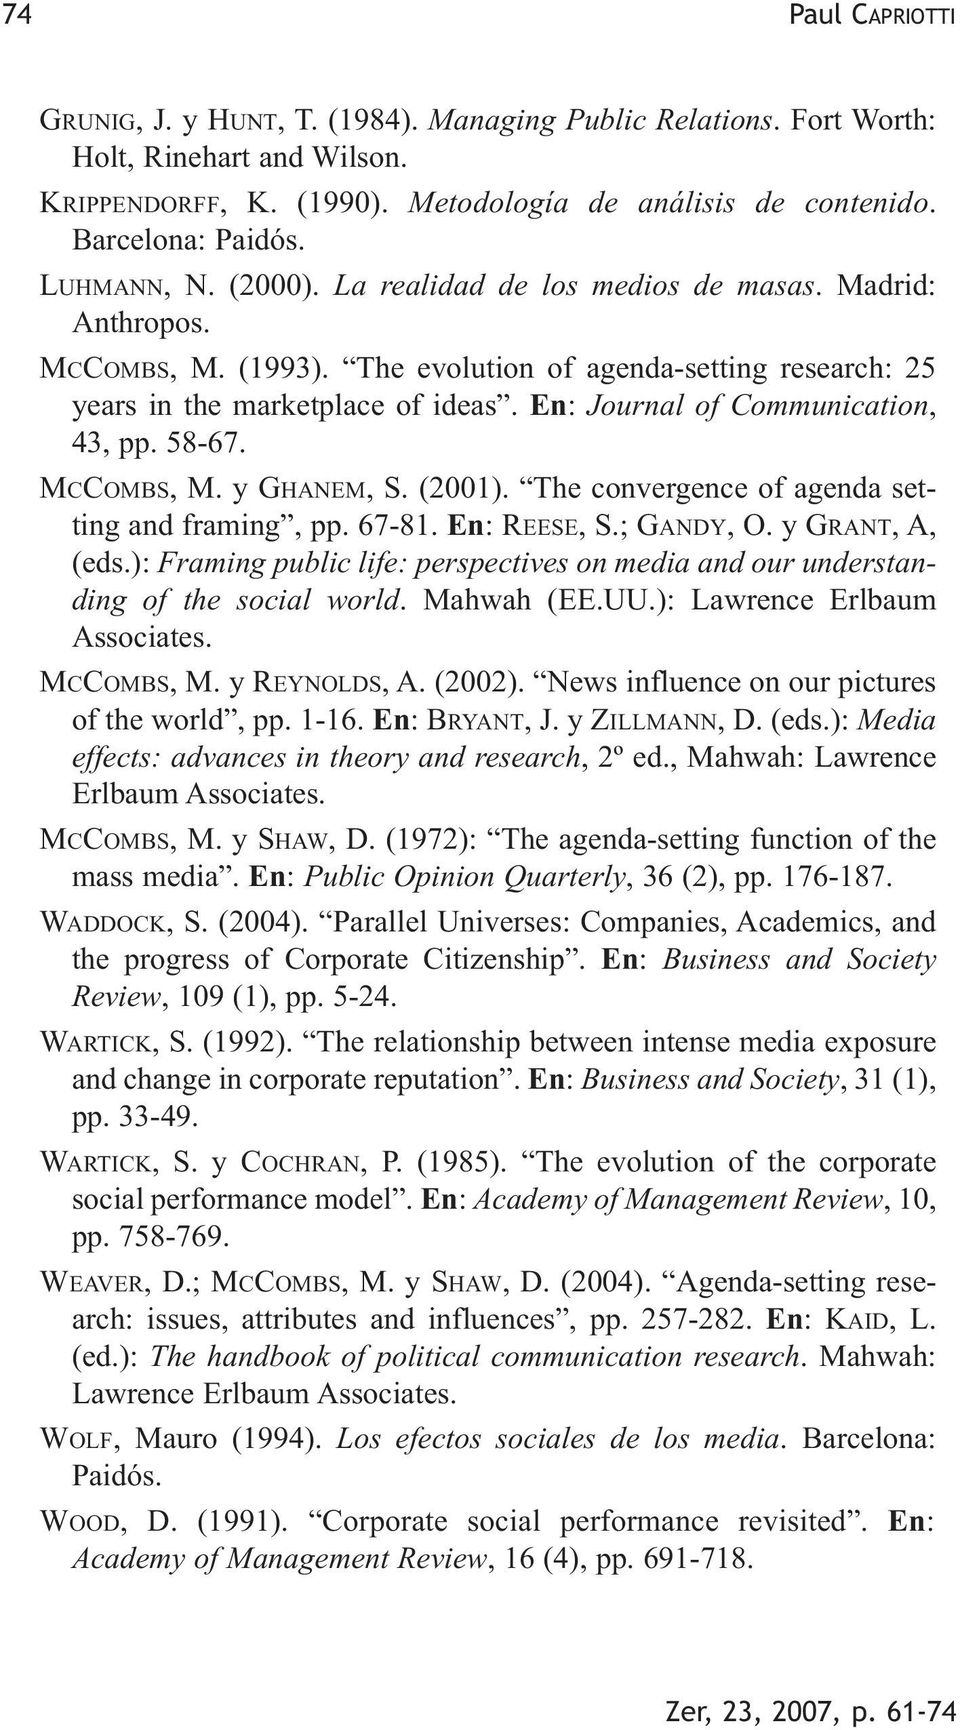 En: Journal of Communication, 43, pp. 58-67. MCCOMBS, M. y GHANEM, S. (2001). The convergence of agenda setting and framing, pp. 67-81. En: REESE, S.; GANDY, O. y GRANT, A, (eds.